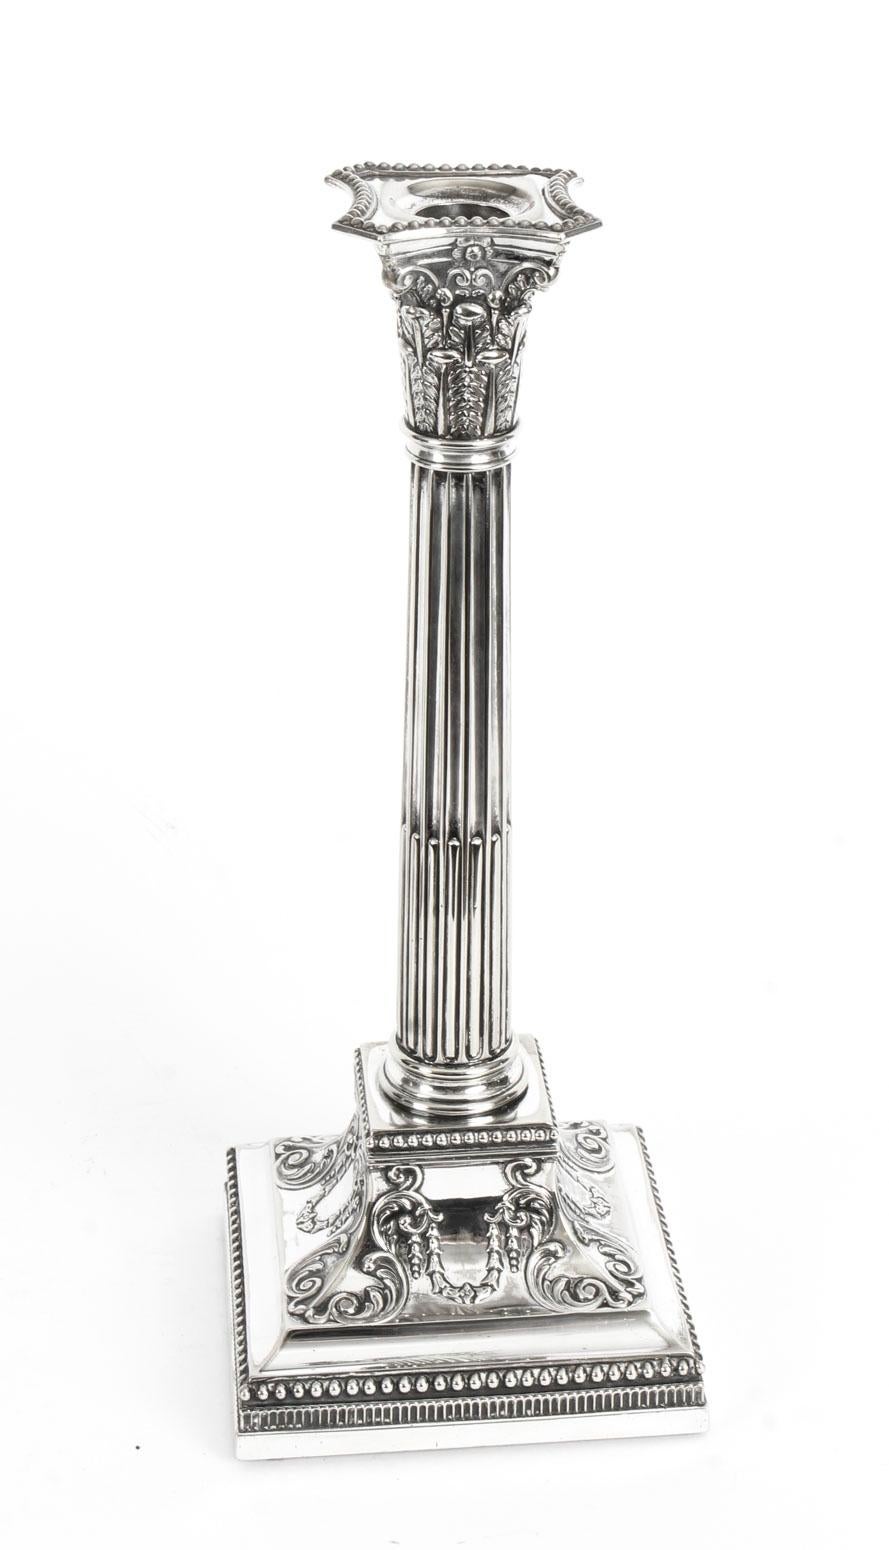 Late 19th Century Antique Pair of Silver Plated Candlesticks by James Dixon, 19th Century